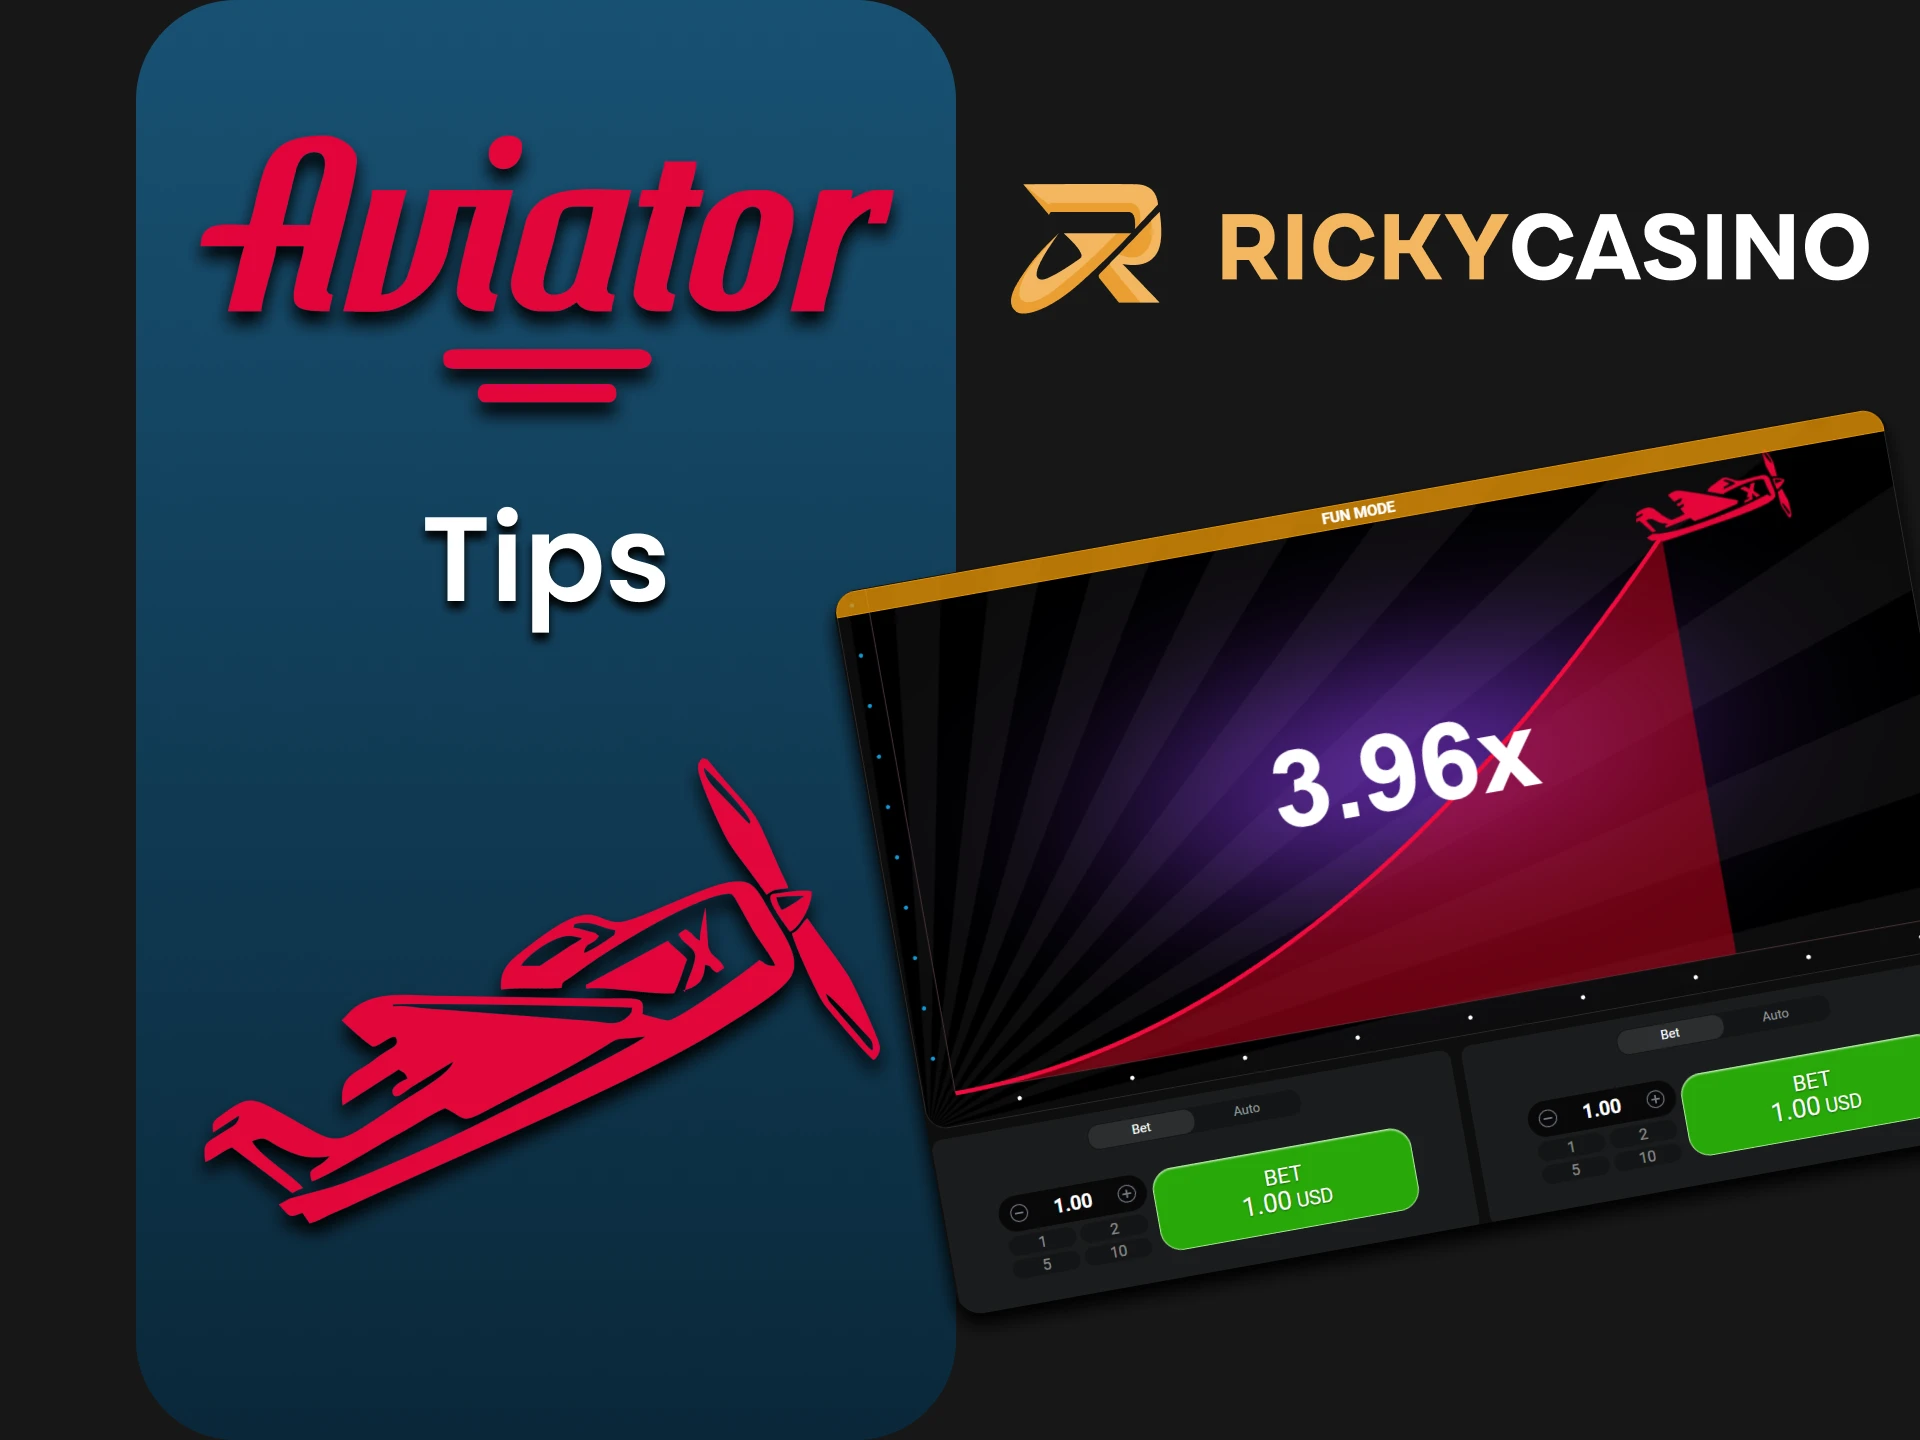 Learn tips for winning in Aviator at Ricky Casino.